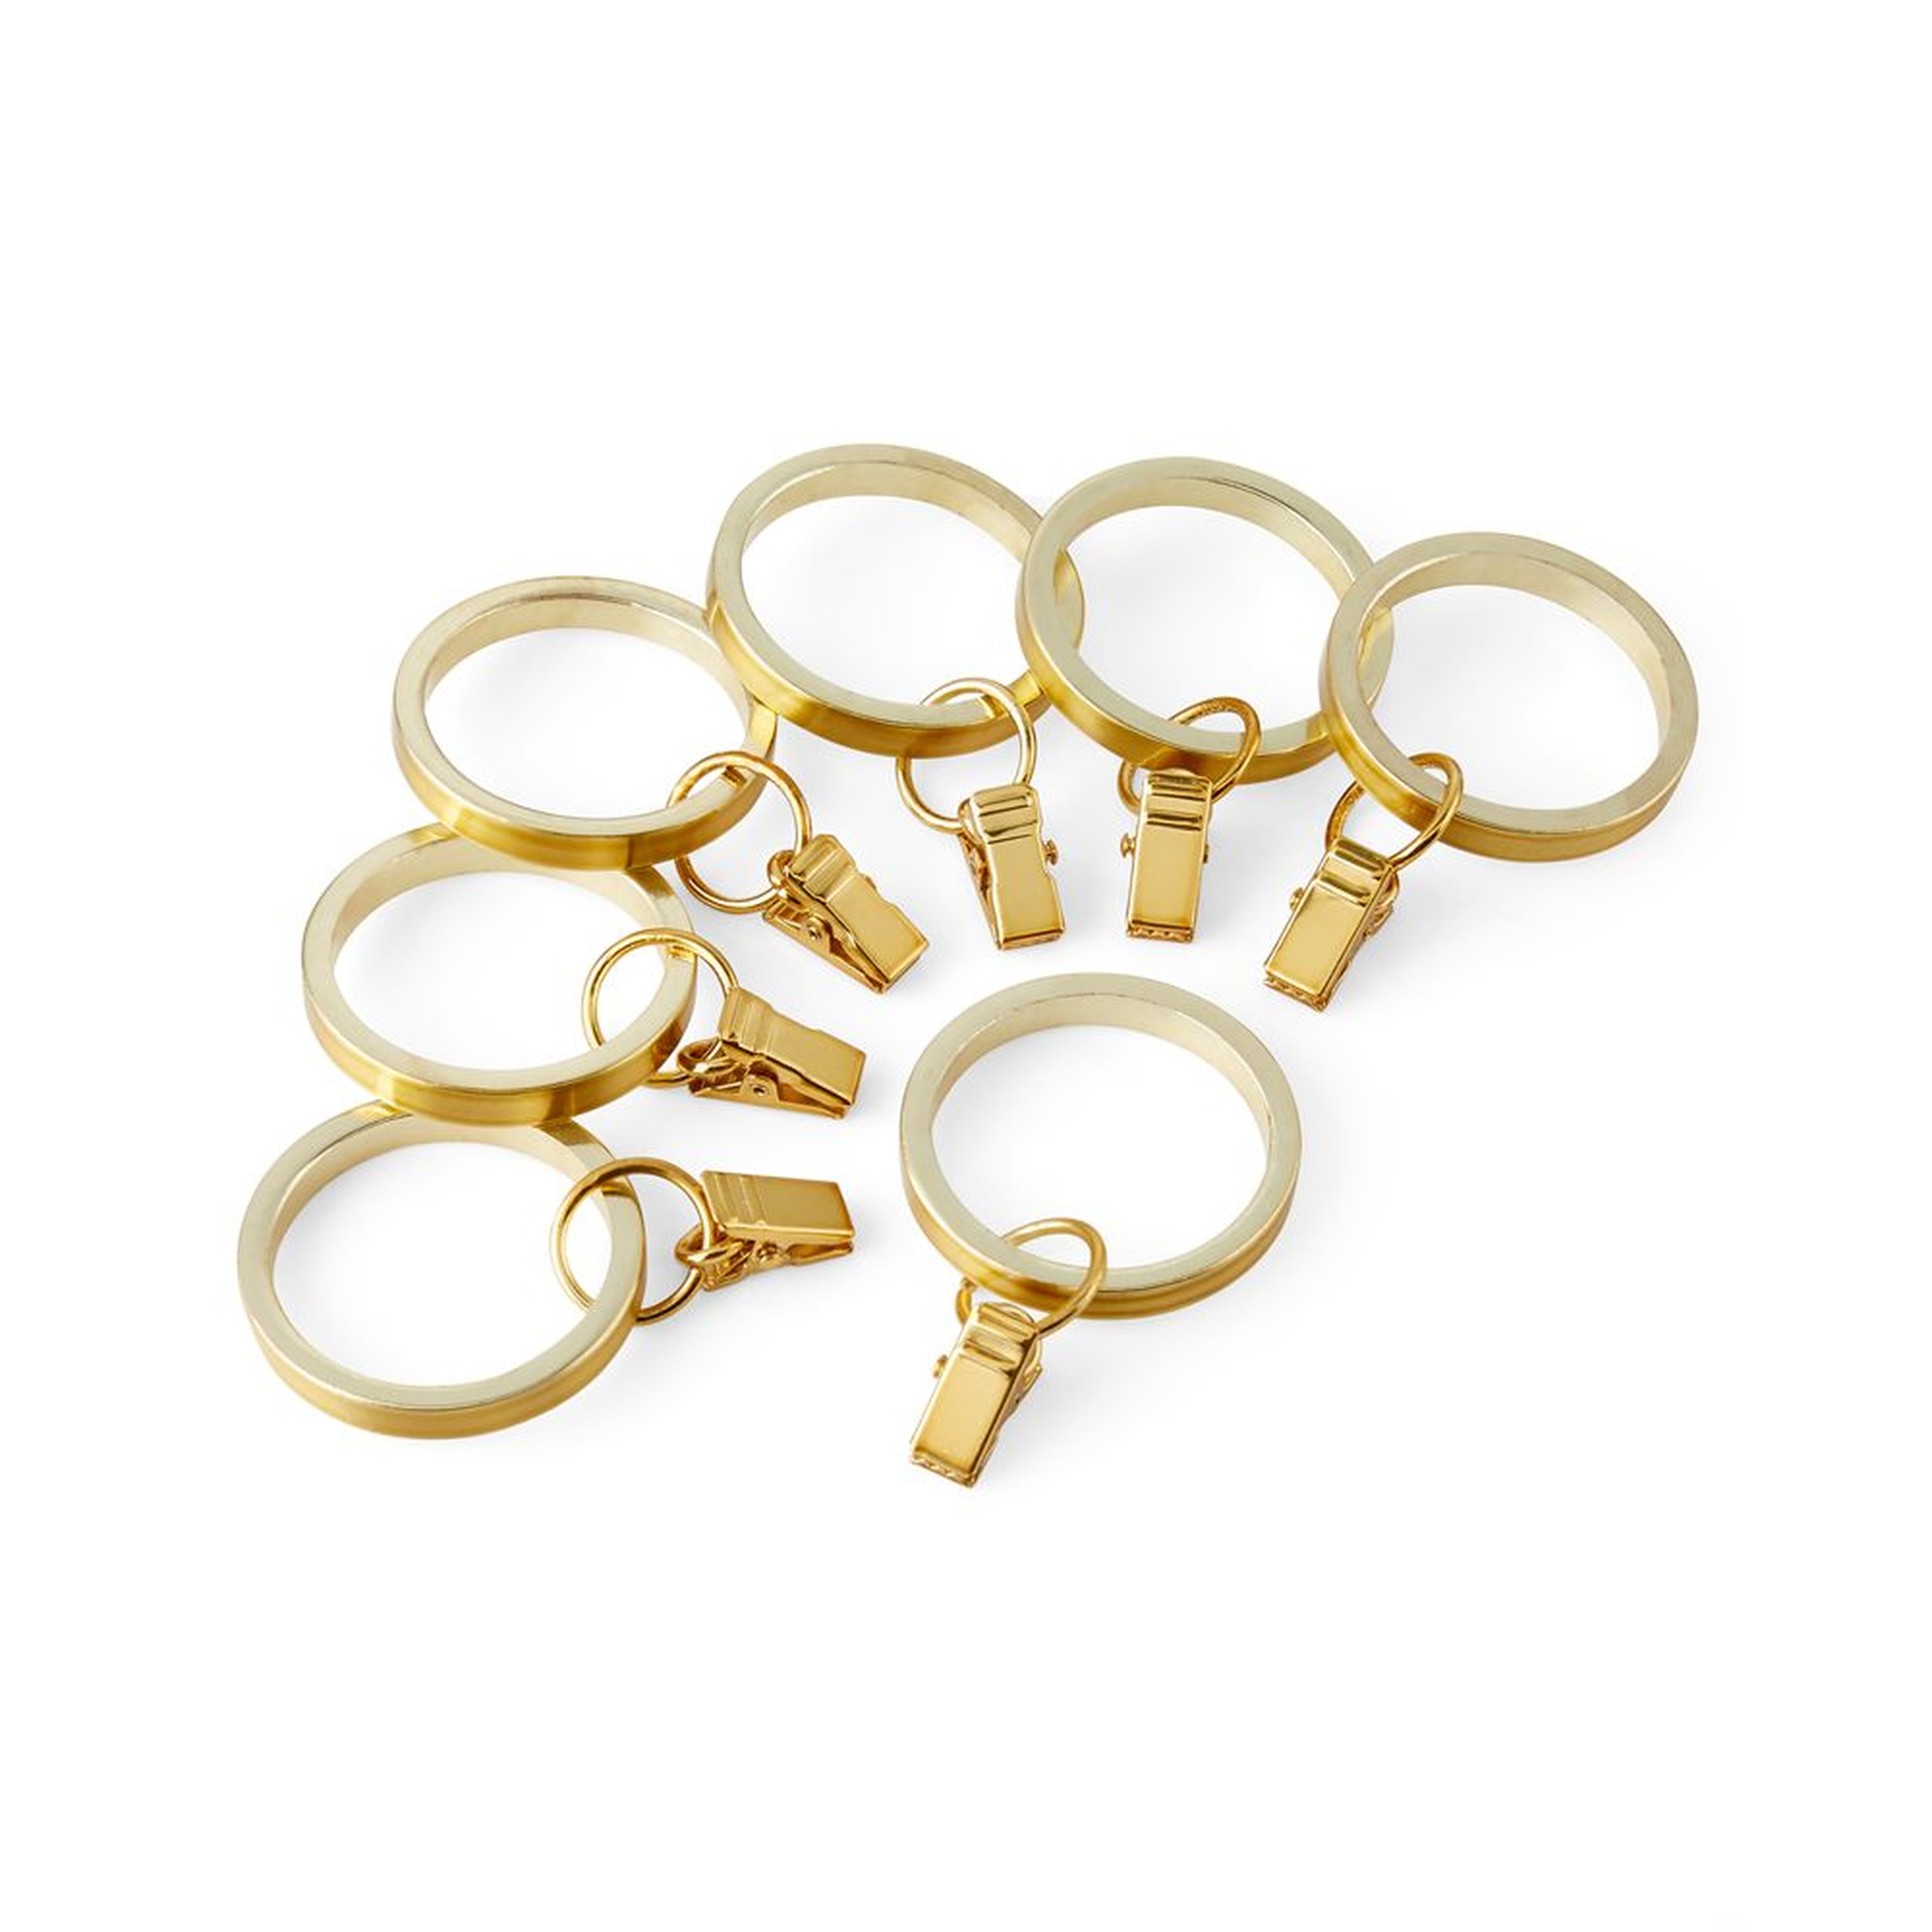 Brass Curtain Rings, Set of 7 - Crate and Barrel